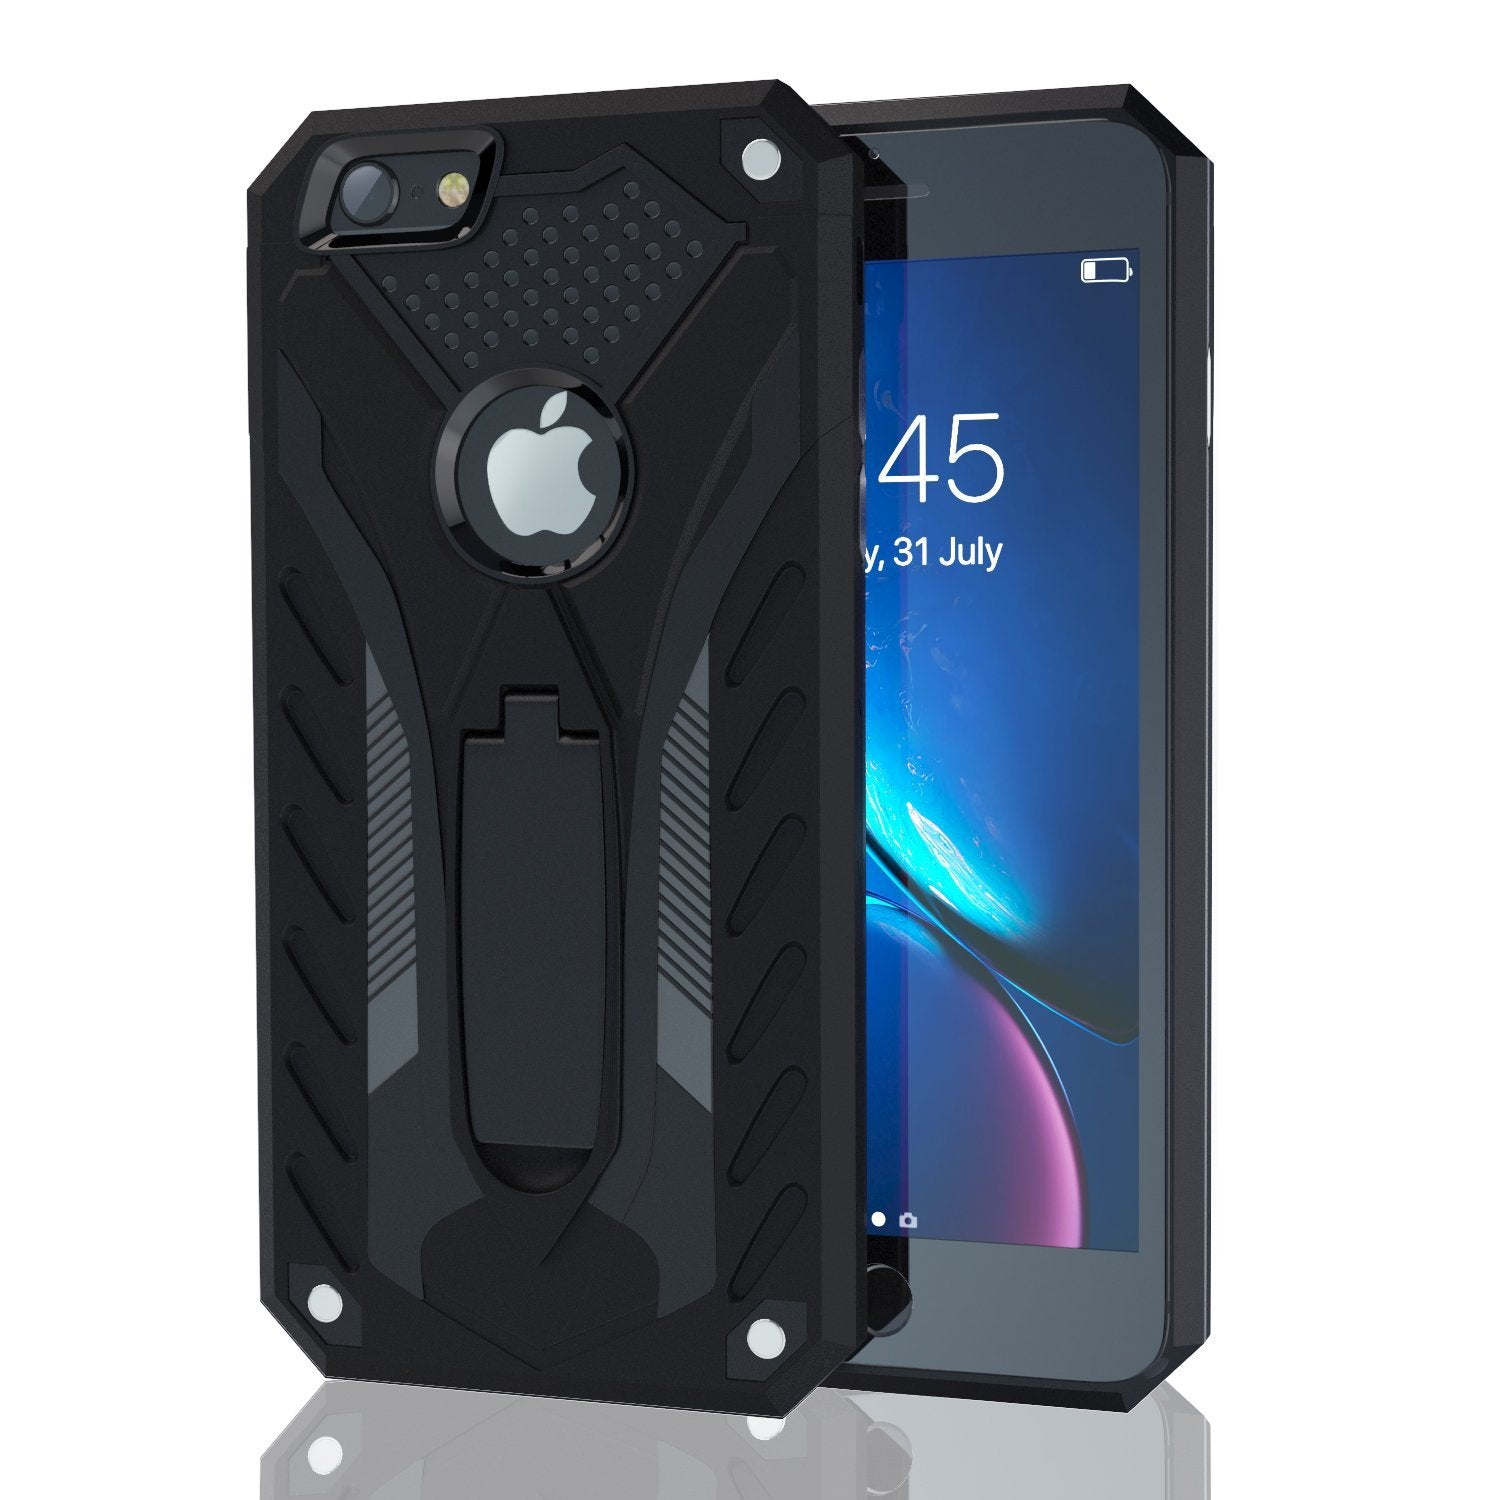 iPhone 6 / iPhone 6s Hard Case with Kickstand Black